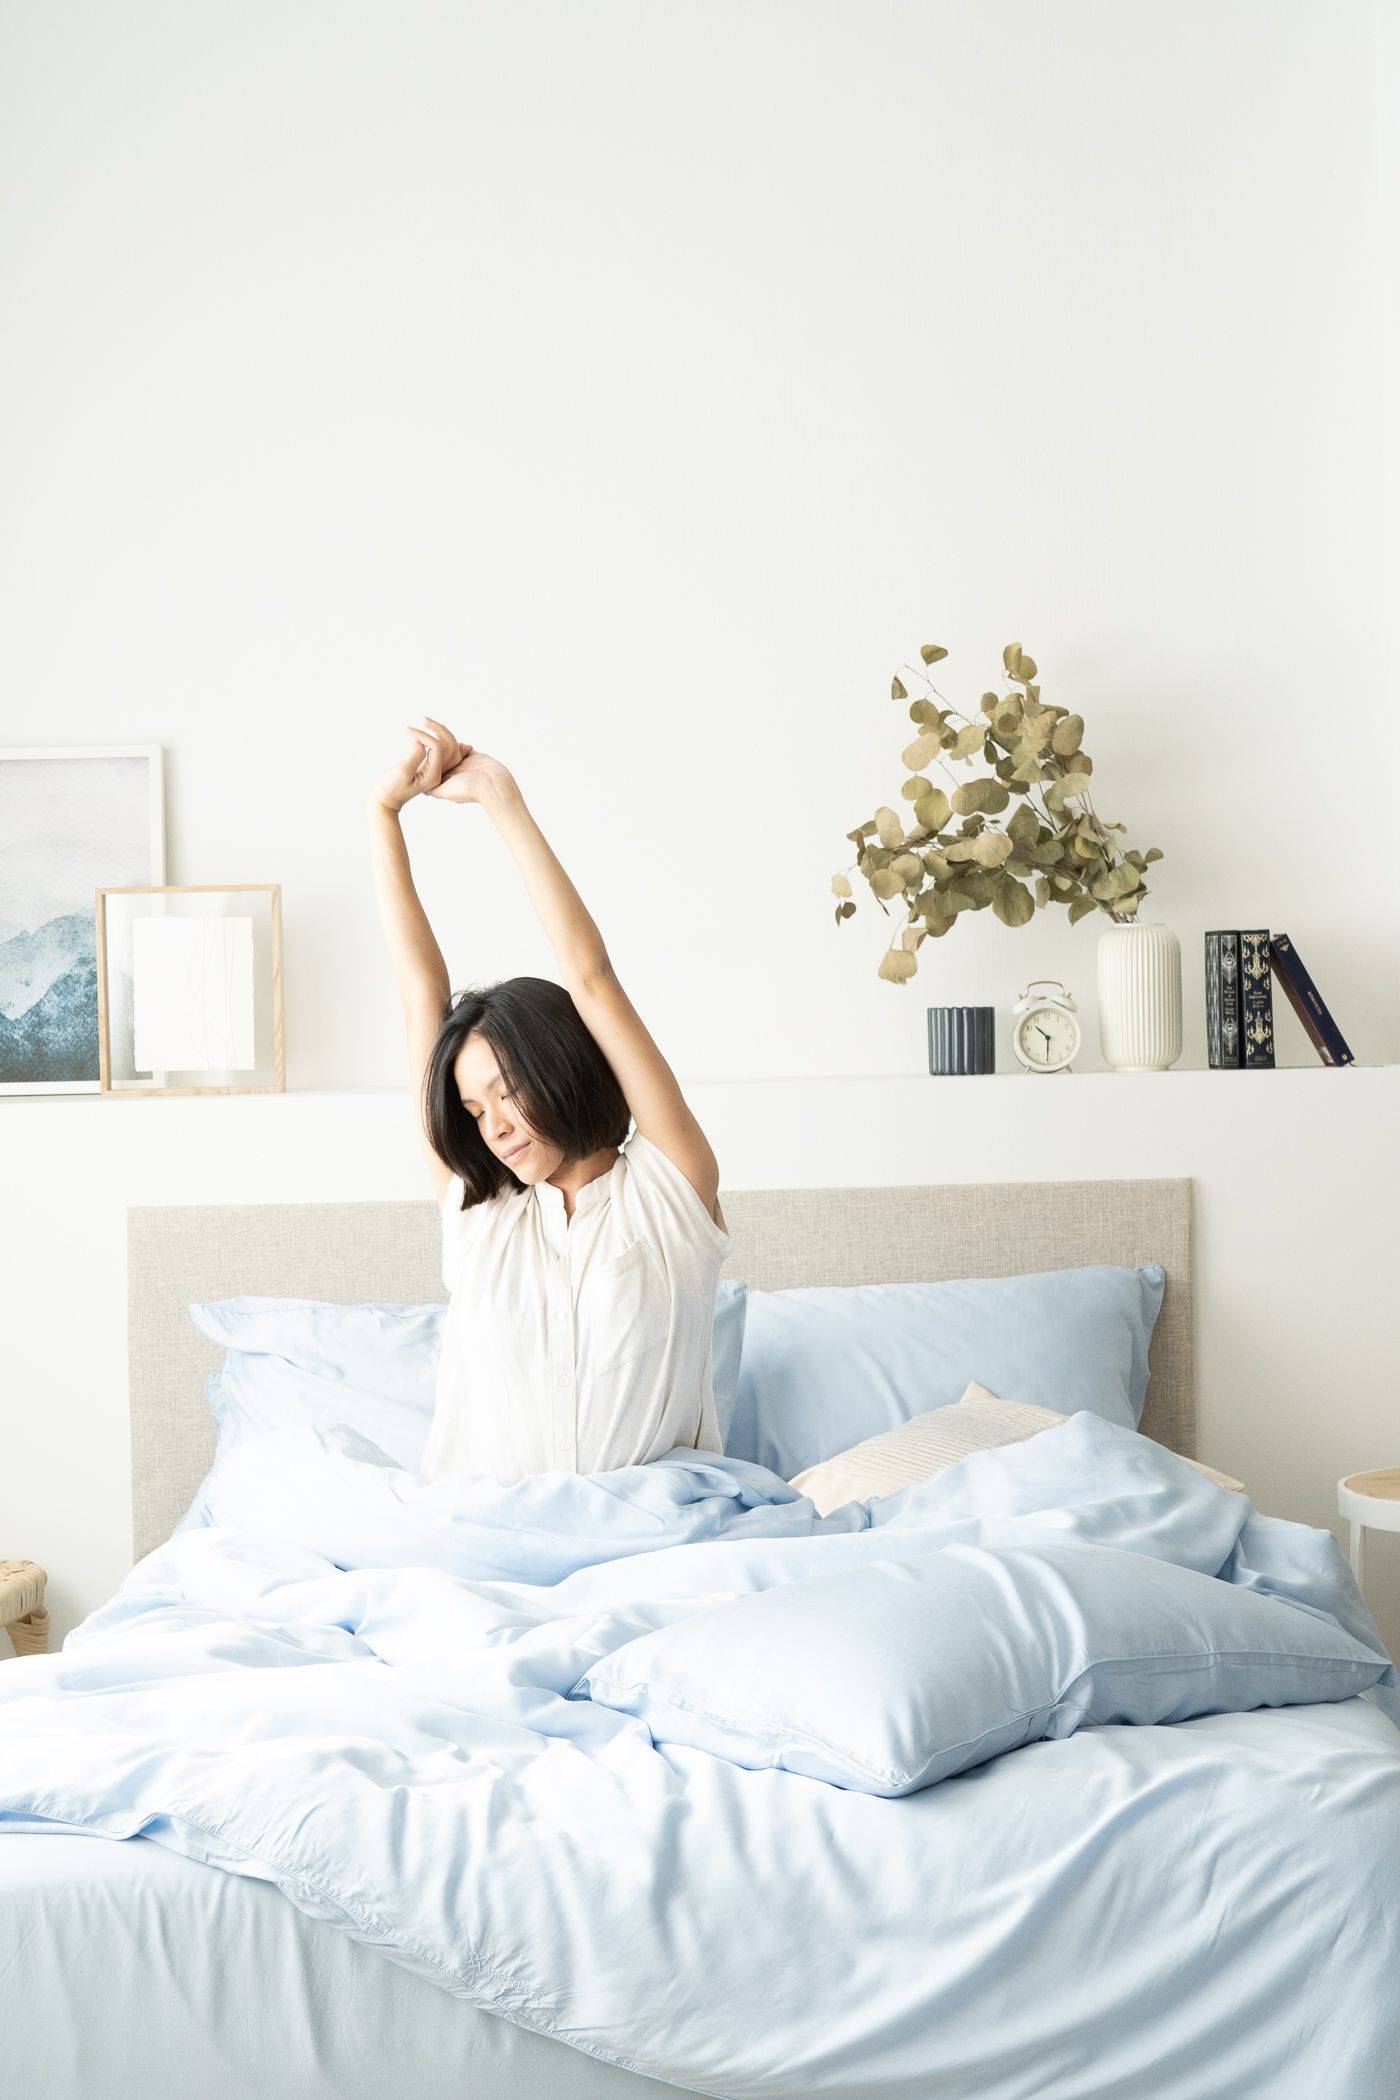 Girl stretching in bed, featuring Weavve's tencel lyocell bed sheet set with pillowcase in light blue